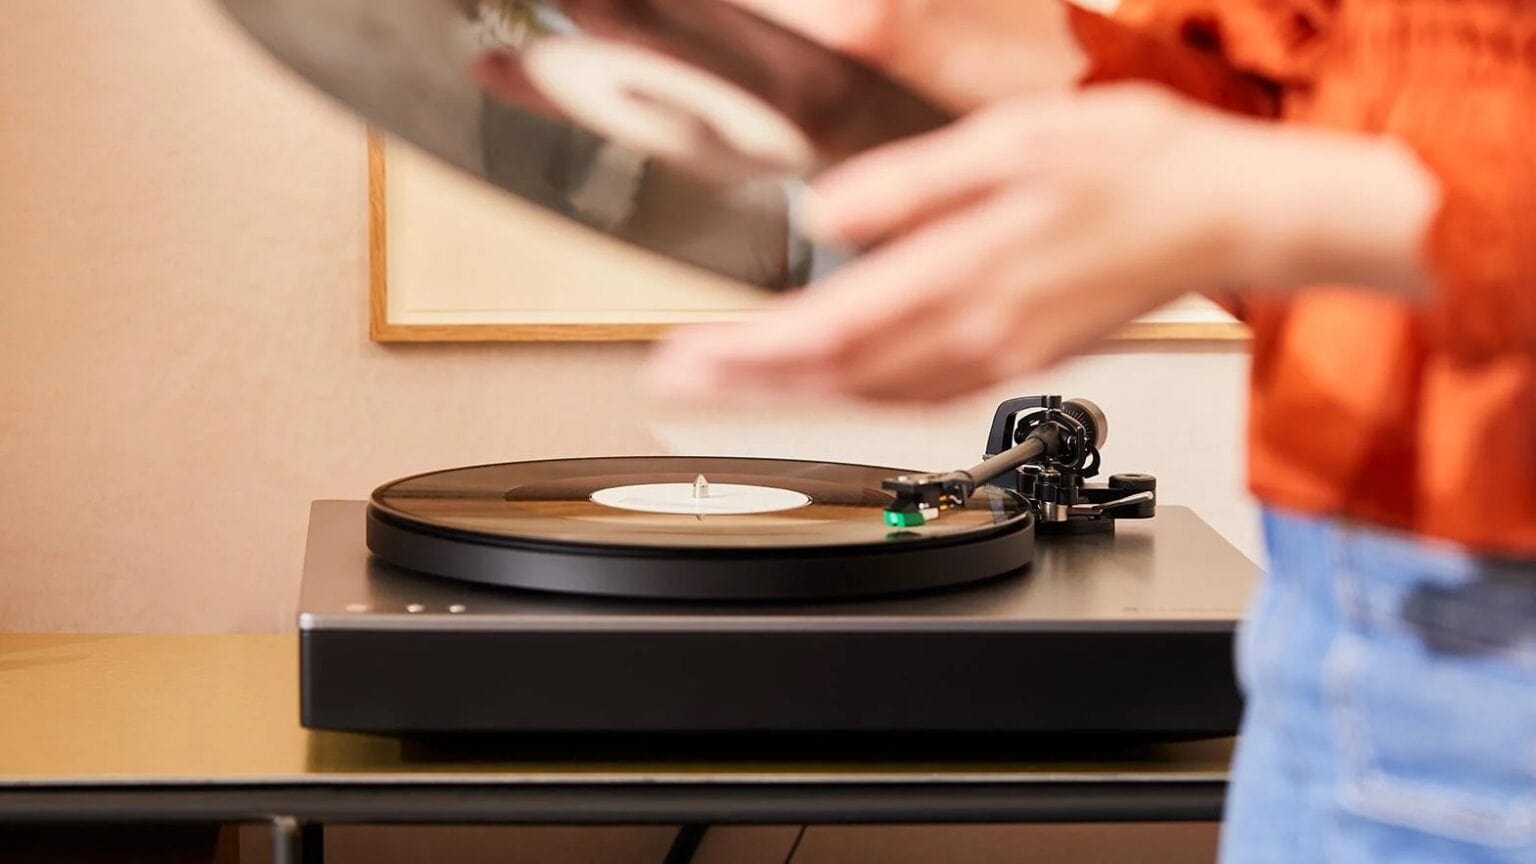 Great record-player sound over Bluetooth? Yes, according to Cambridge Audio.